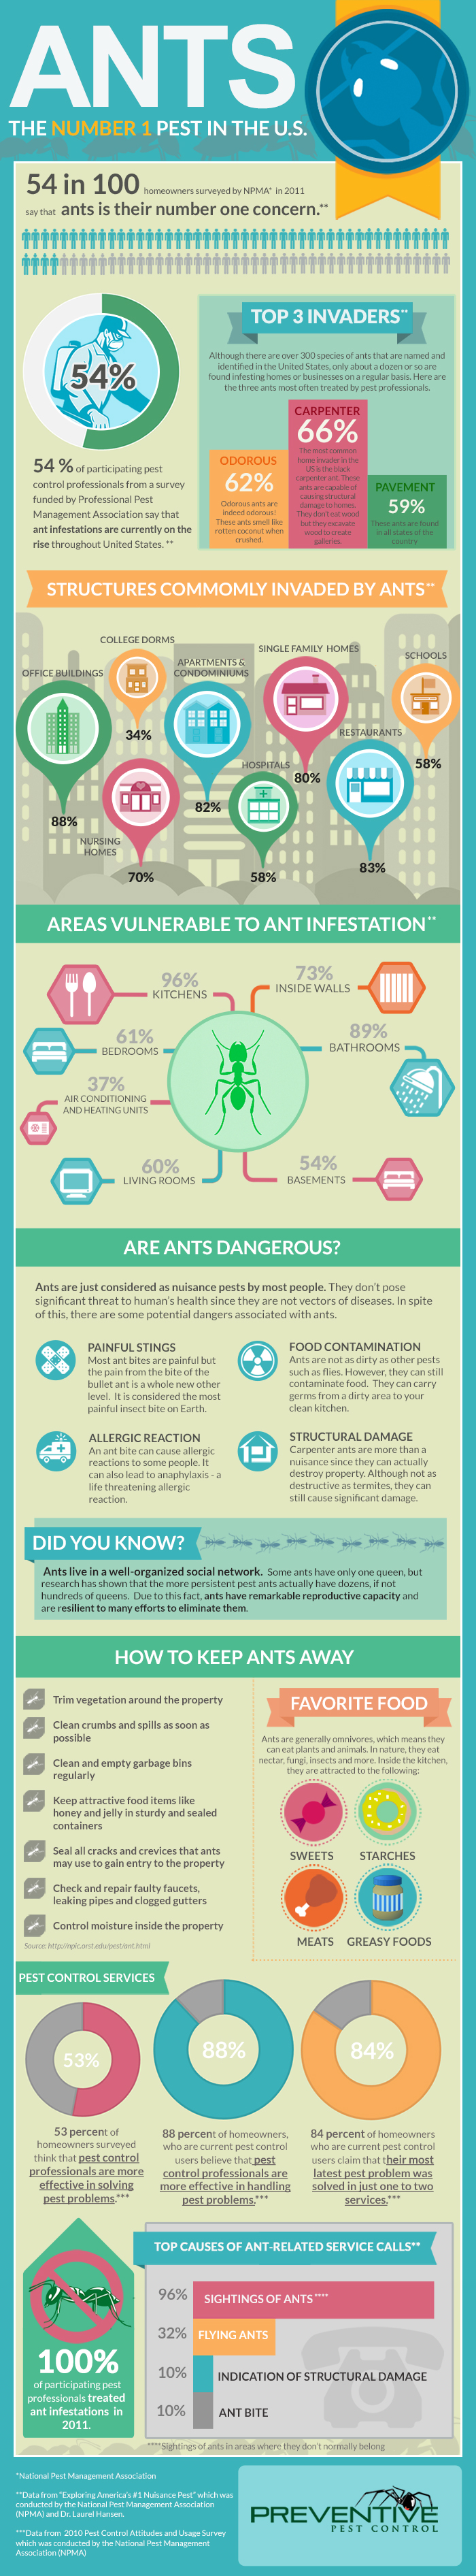 Ants the Number One Pest in the U.S.